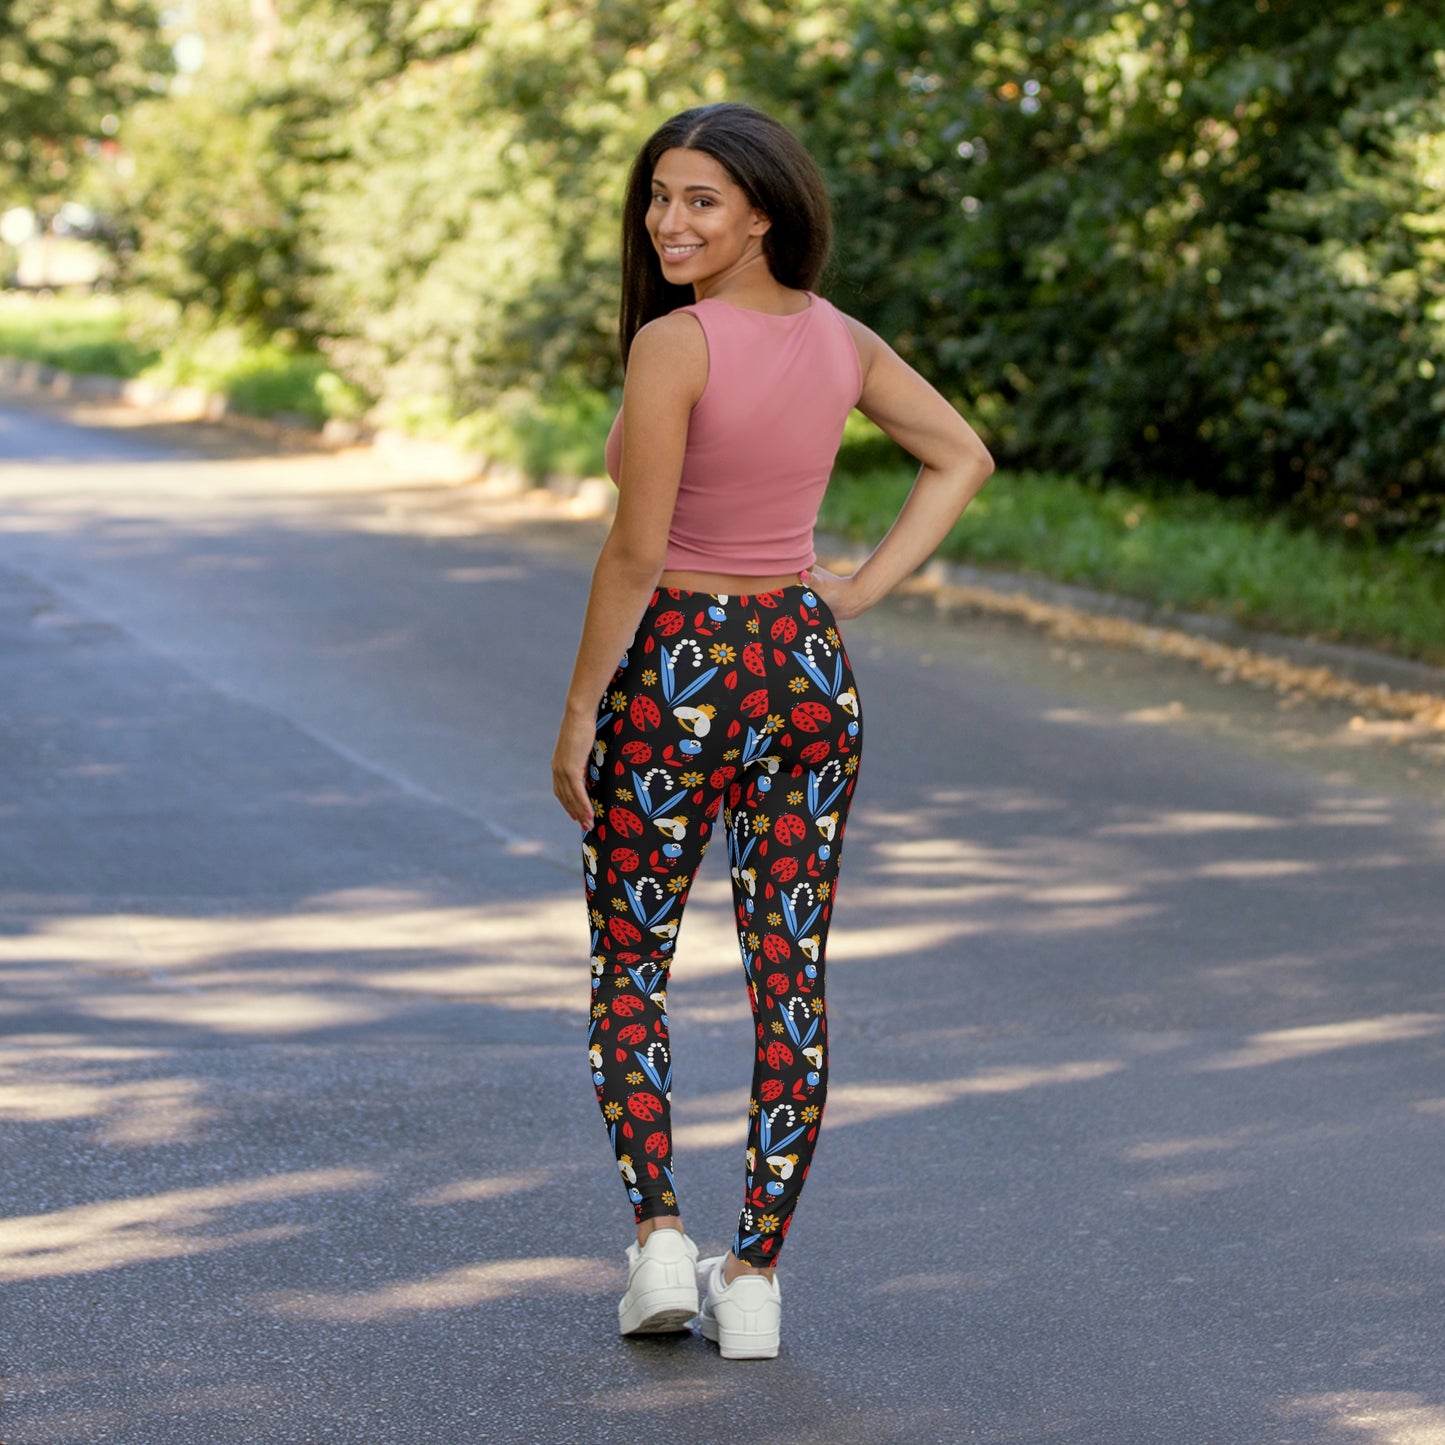 Ladybugs Cute Summer Women Leggings, One of a Kind Gift - Unique Workout Activewear tights for Wife, Girlfriend, Mothers Day Gift